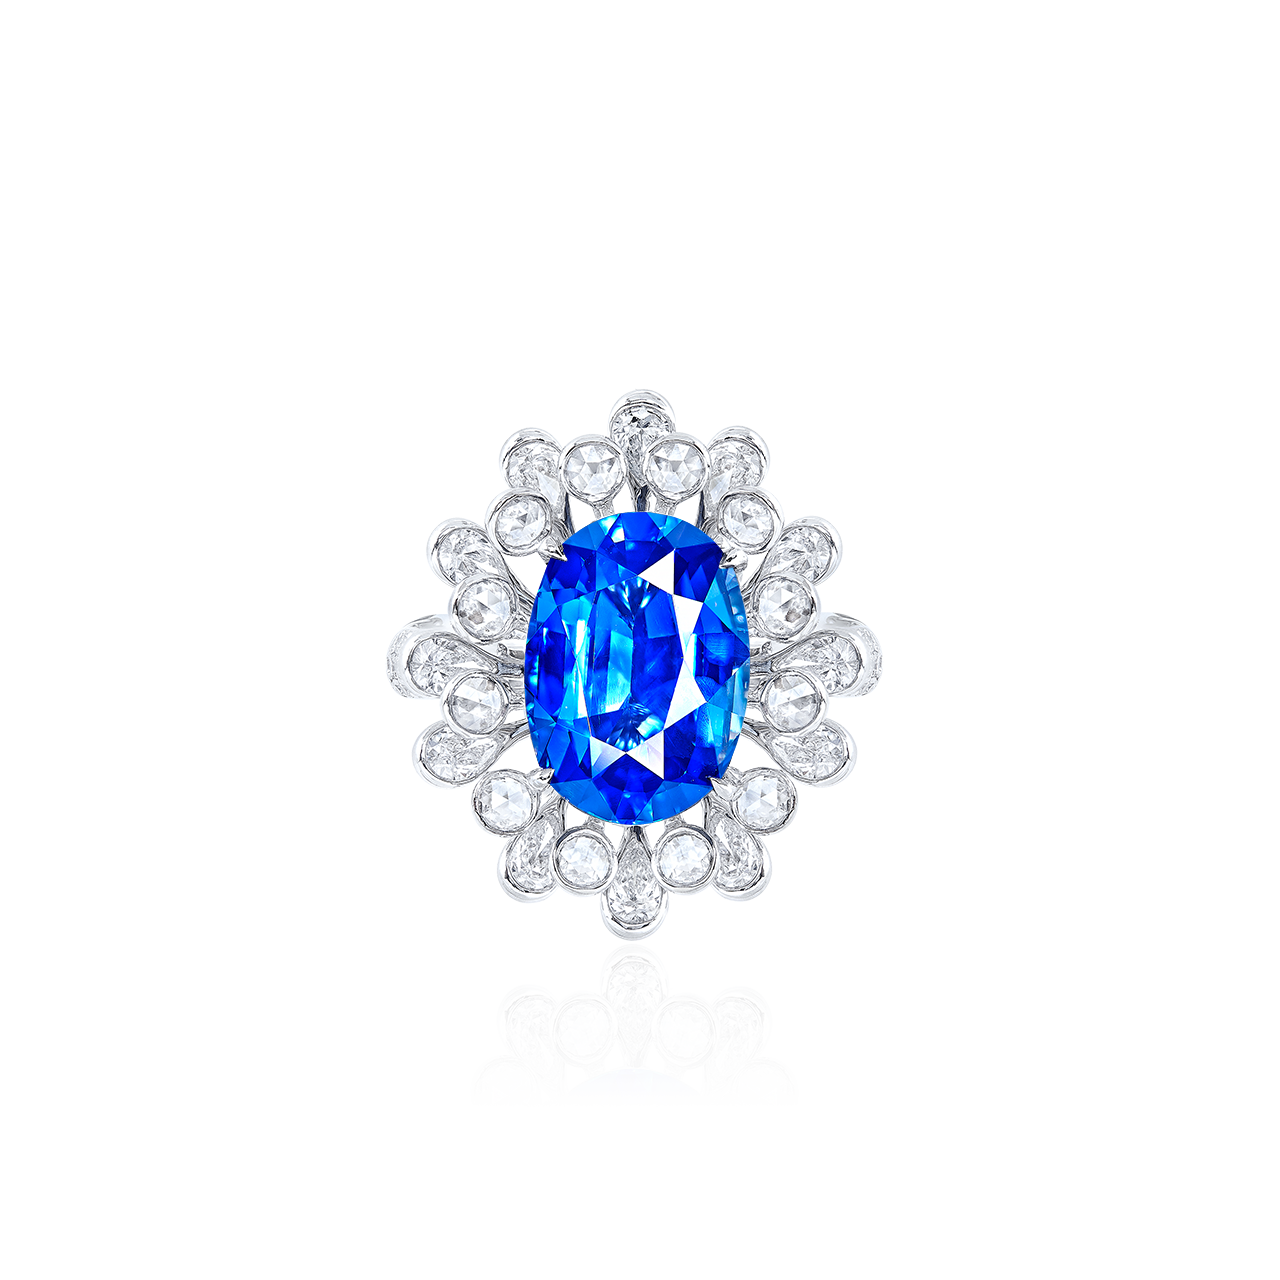 GIA  6.62克拉 喀什米爾天然無燒藍寶鑽石戒
KASHMIR SAPPHIRE AND DIAMOND RING
(With No indications of thermal treatm